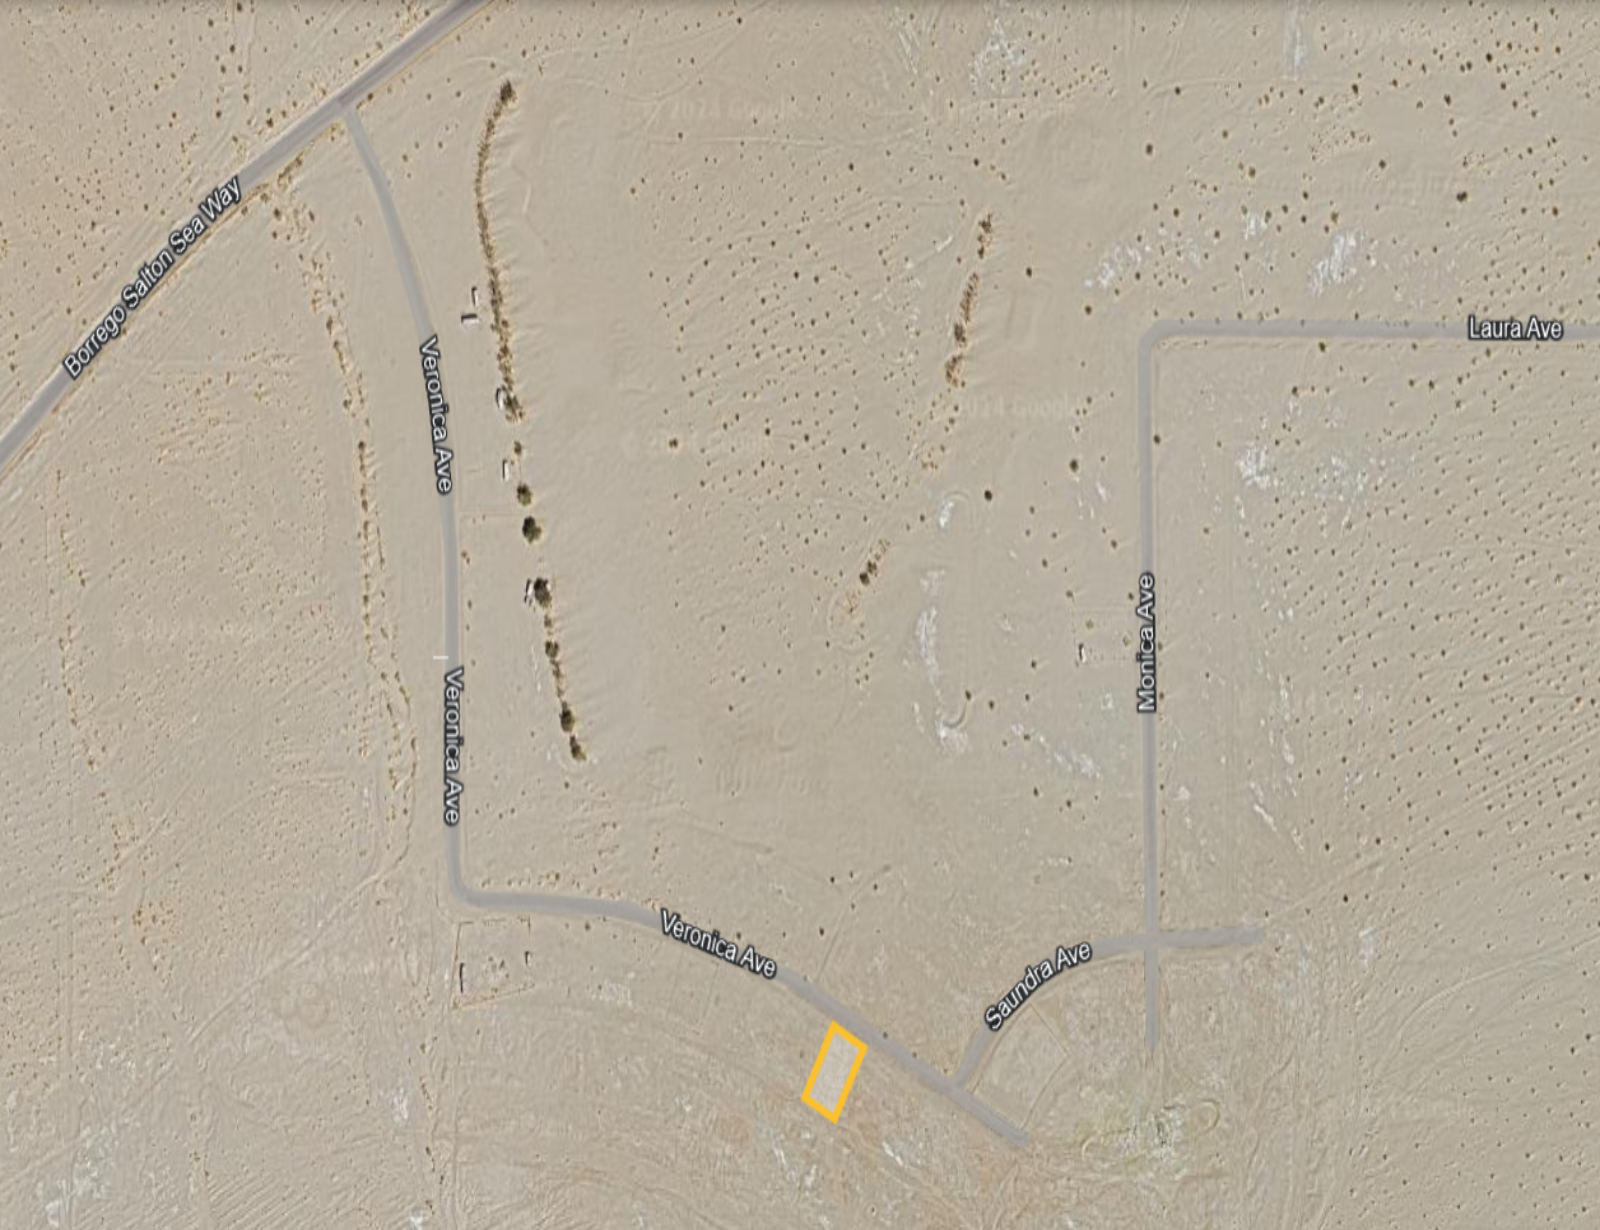 OFF-ROADING DELIGHT!! LOT NEAR OCOTILLO WELLS!! |LOW MONTHLY PAYMENTS OF $150.00  1529 Veronica Ave., Salton City, CA 92275 APN: 007-901-006-000 - Get Land Today